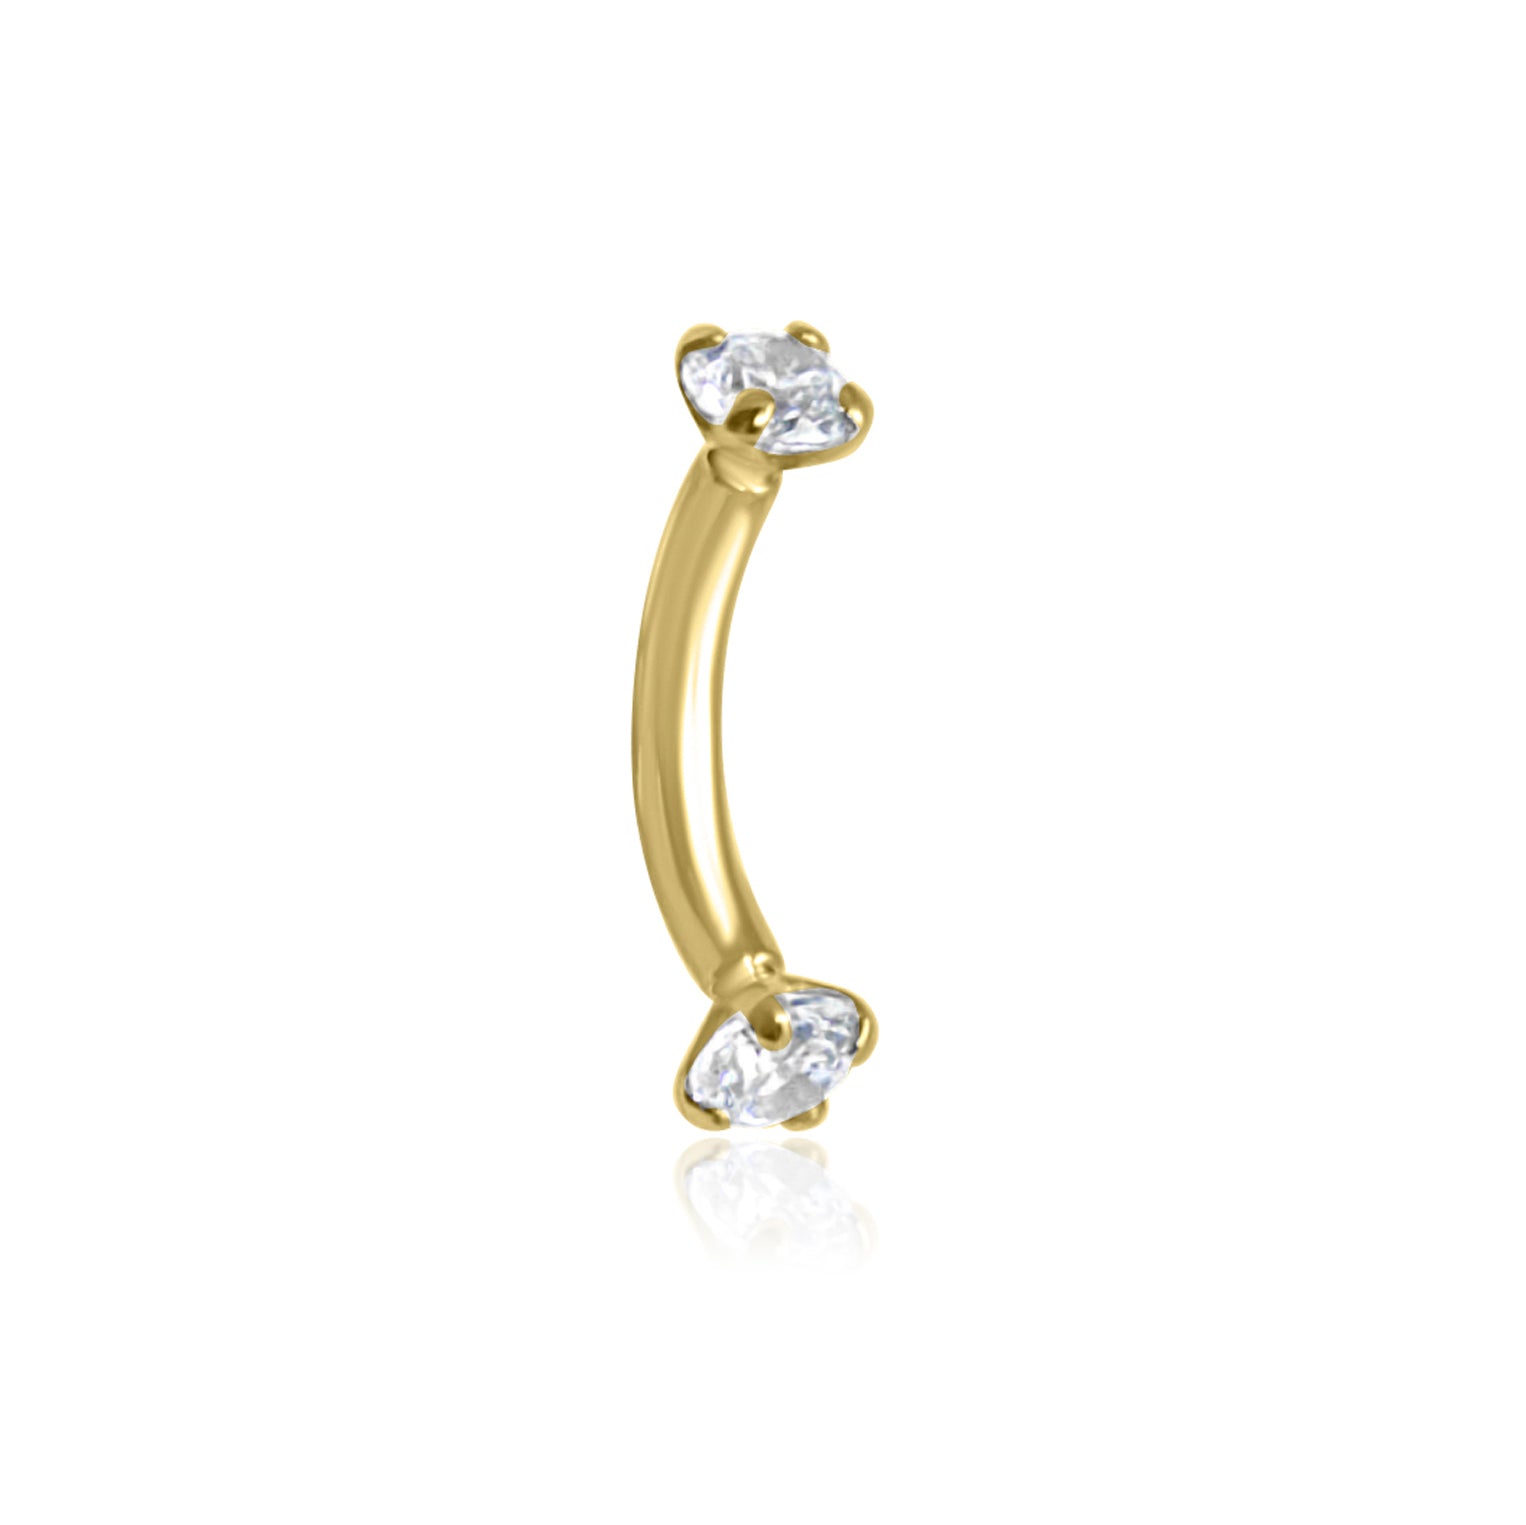 CHLUXE Crystal Curved Barbell - 14K Yellow Gold